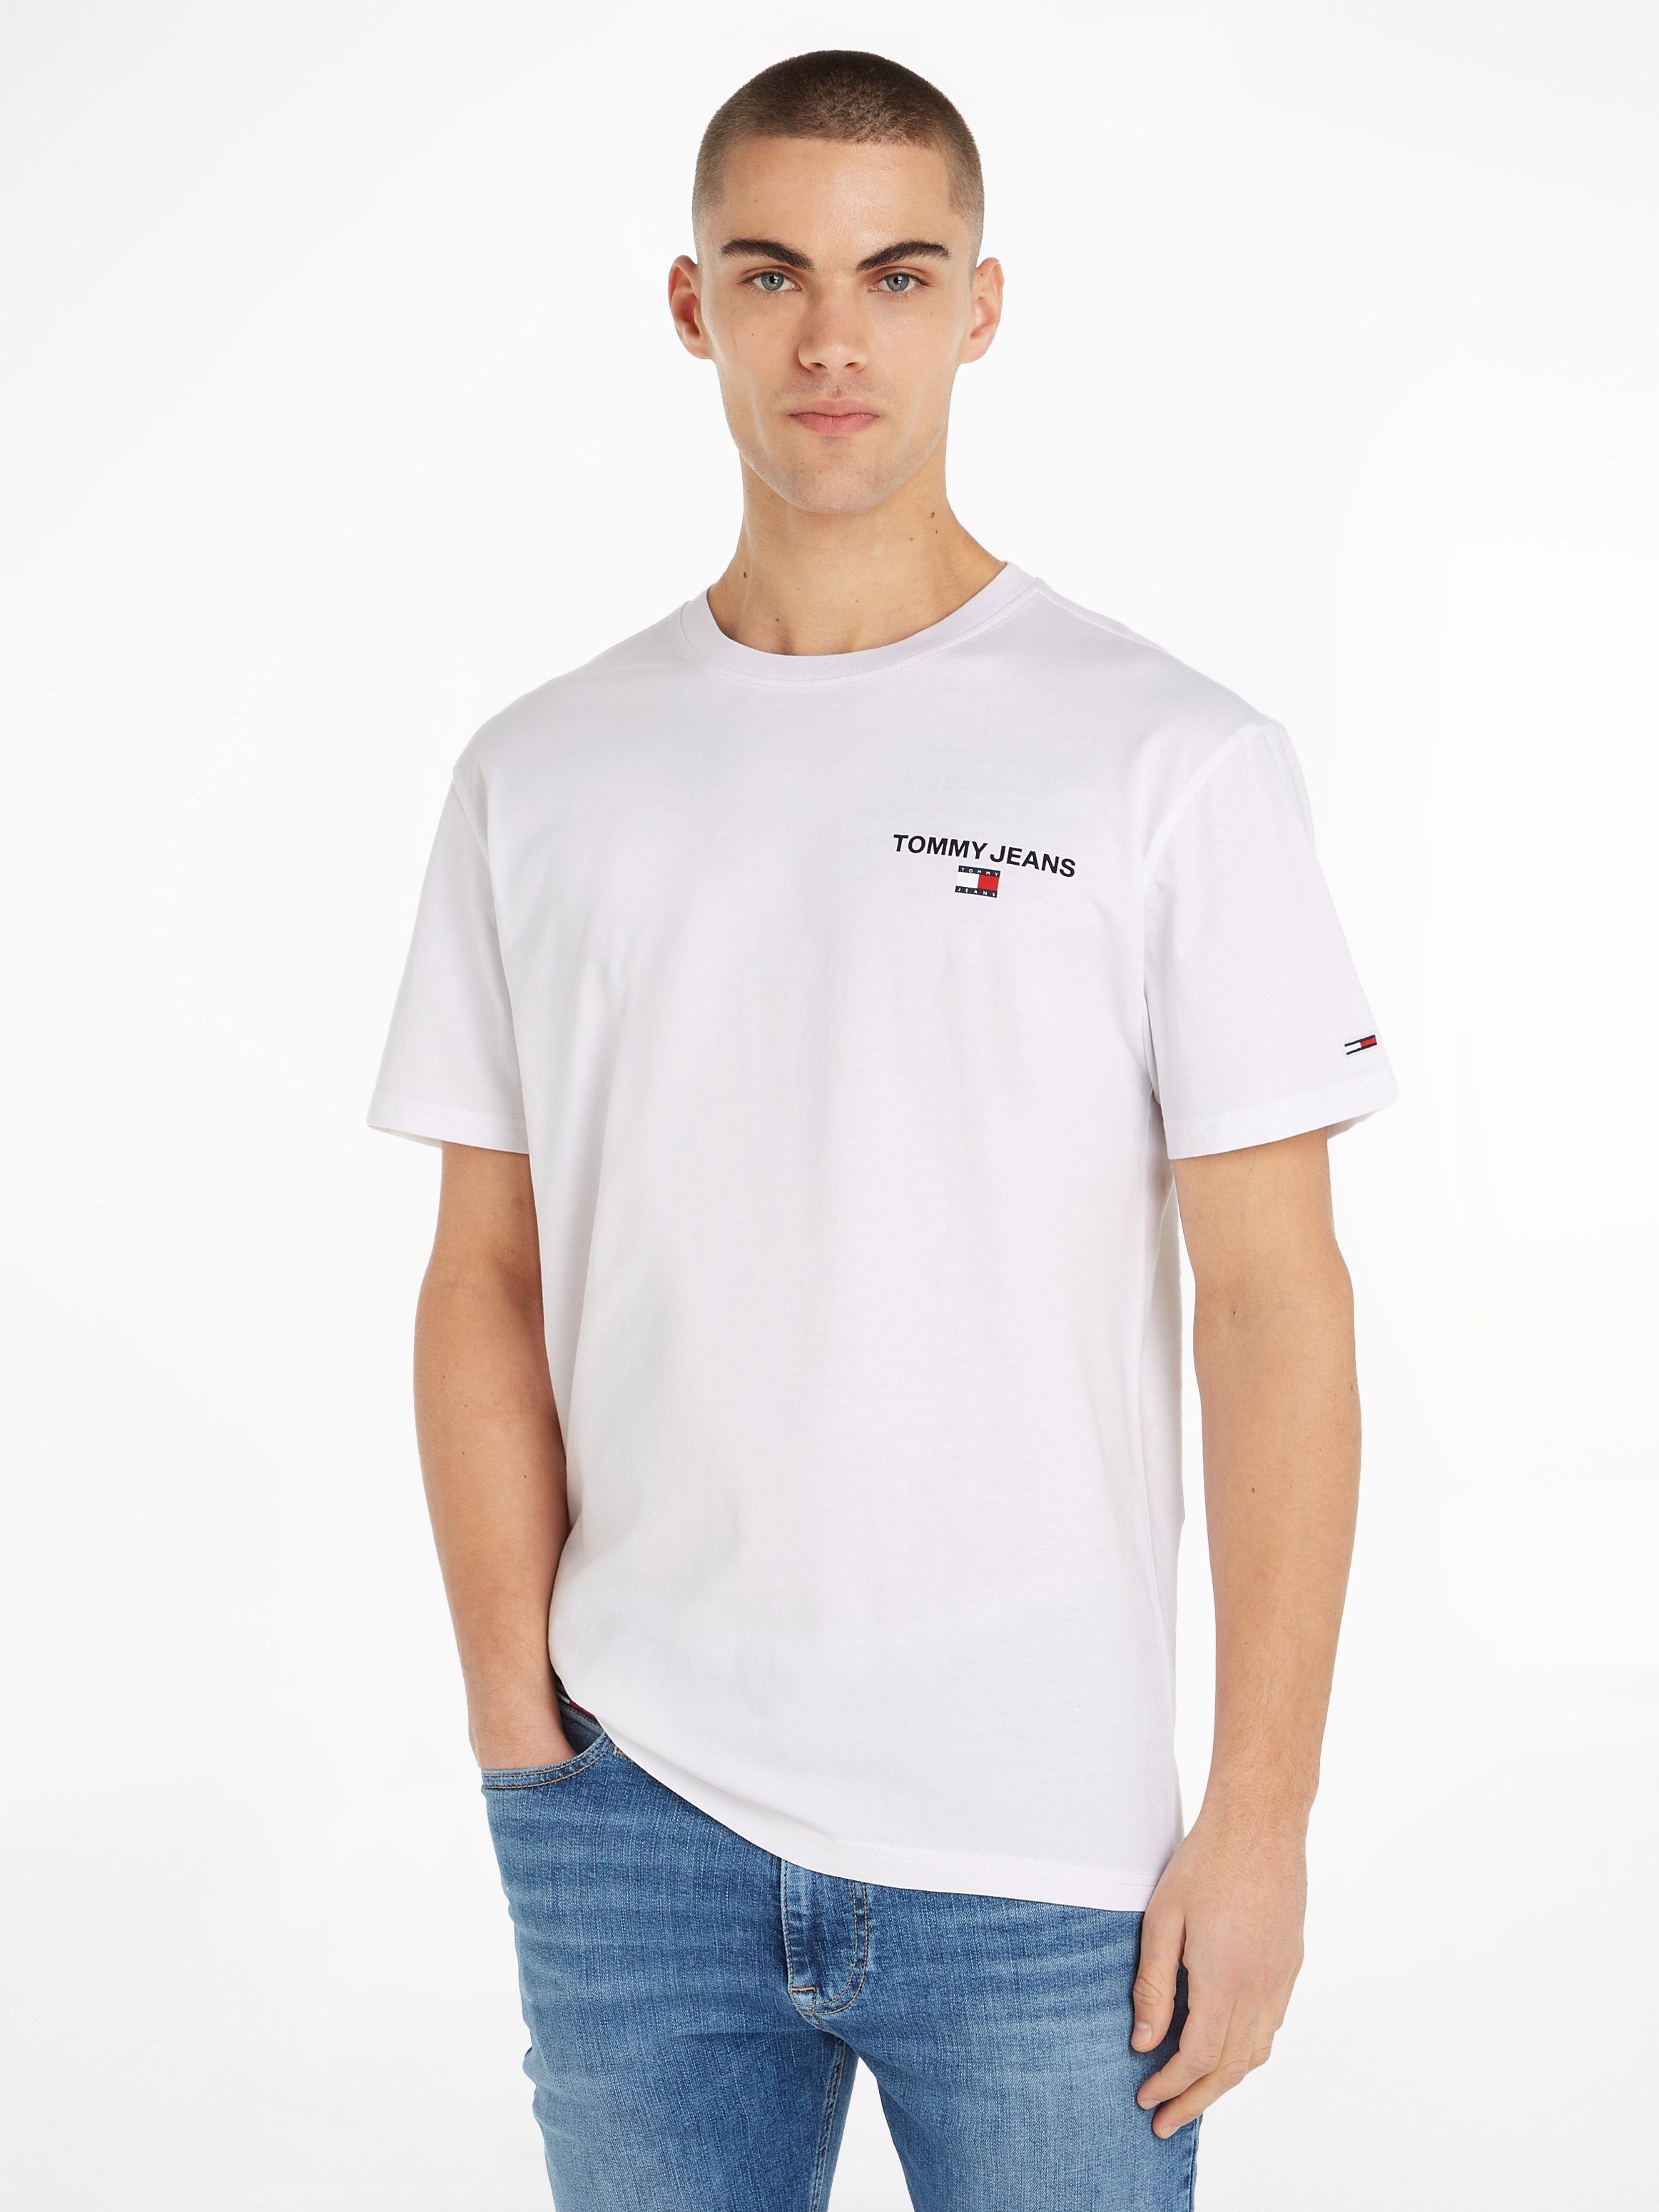 Jeans Tommy TEE CLSC LINEAR TJM White T-Shirt BACK PRINT